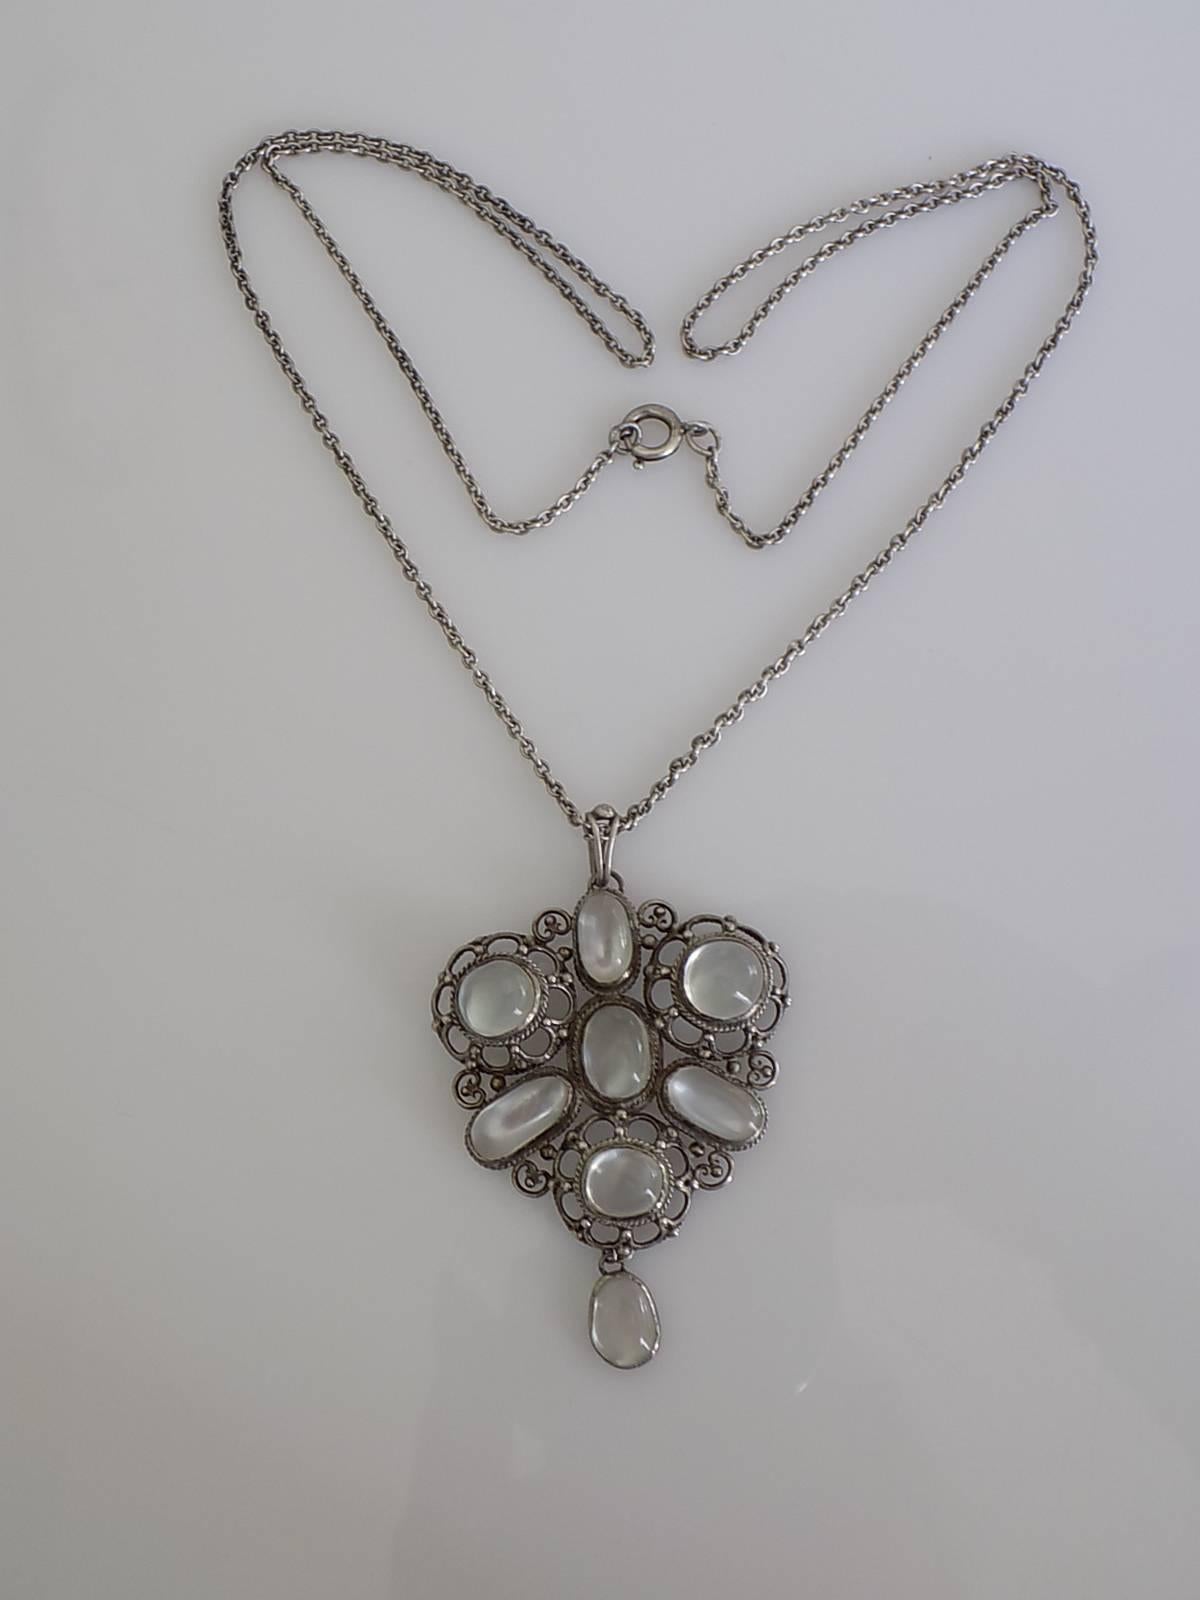 A Beautiful Arts & Crafts c.1920s Sterling Silver and White Moonstone pendant on long Sterling Silver chain. English origin.
Drop of the pendant including bale 60mm, Width 39mm.
Length of the chain including clasp 24